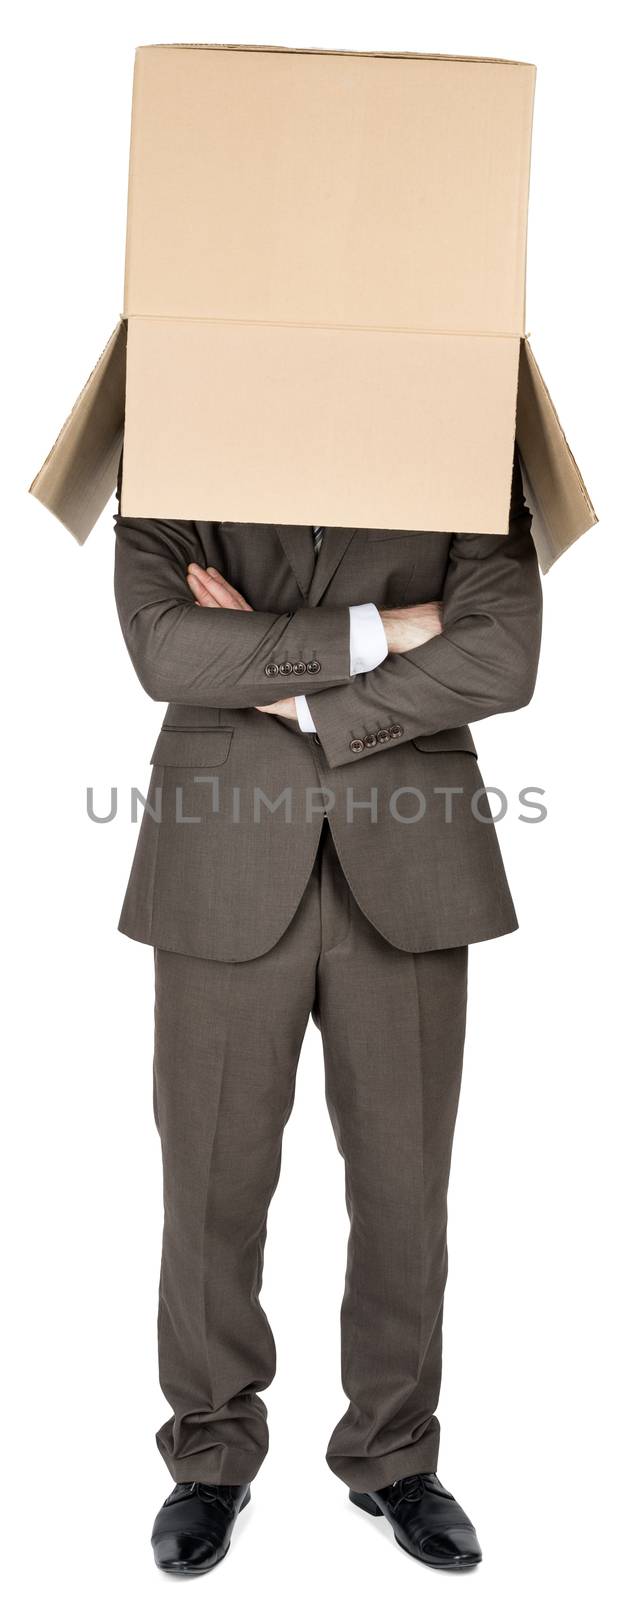 Businessman with brown box on his head, crossed arms, isolated on white background